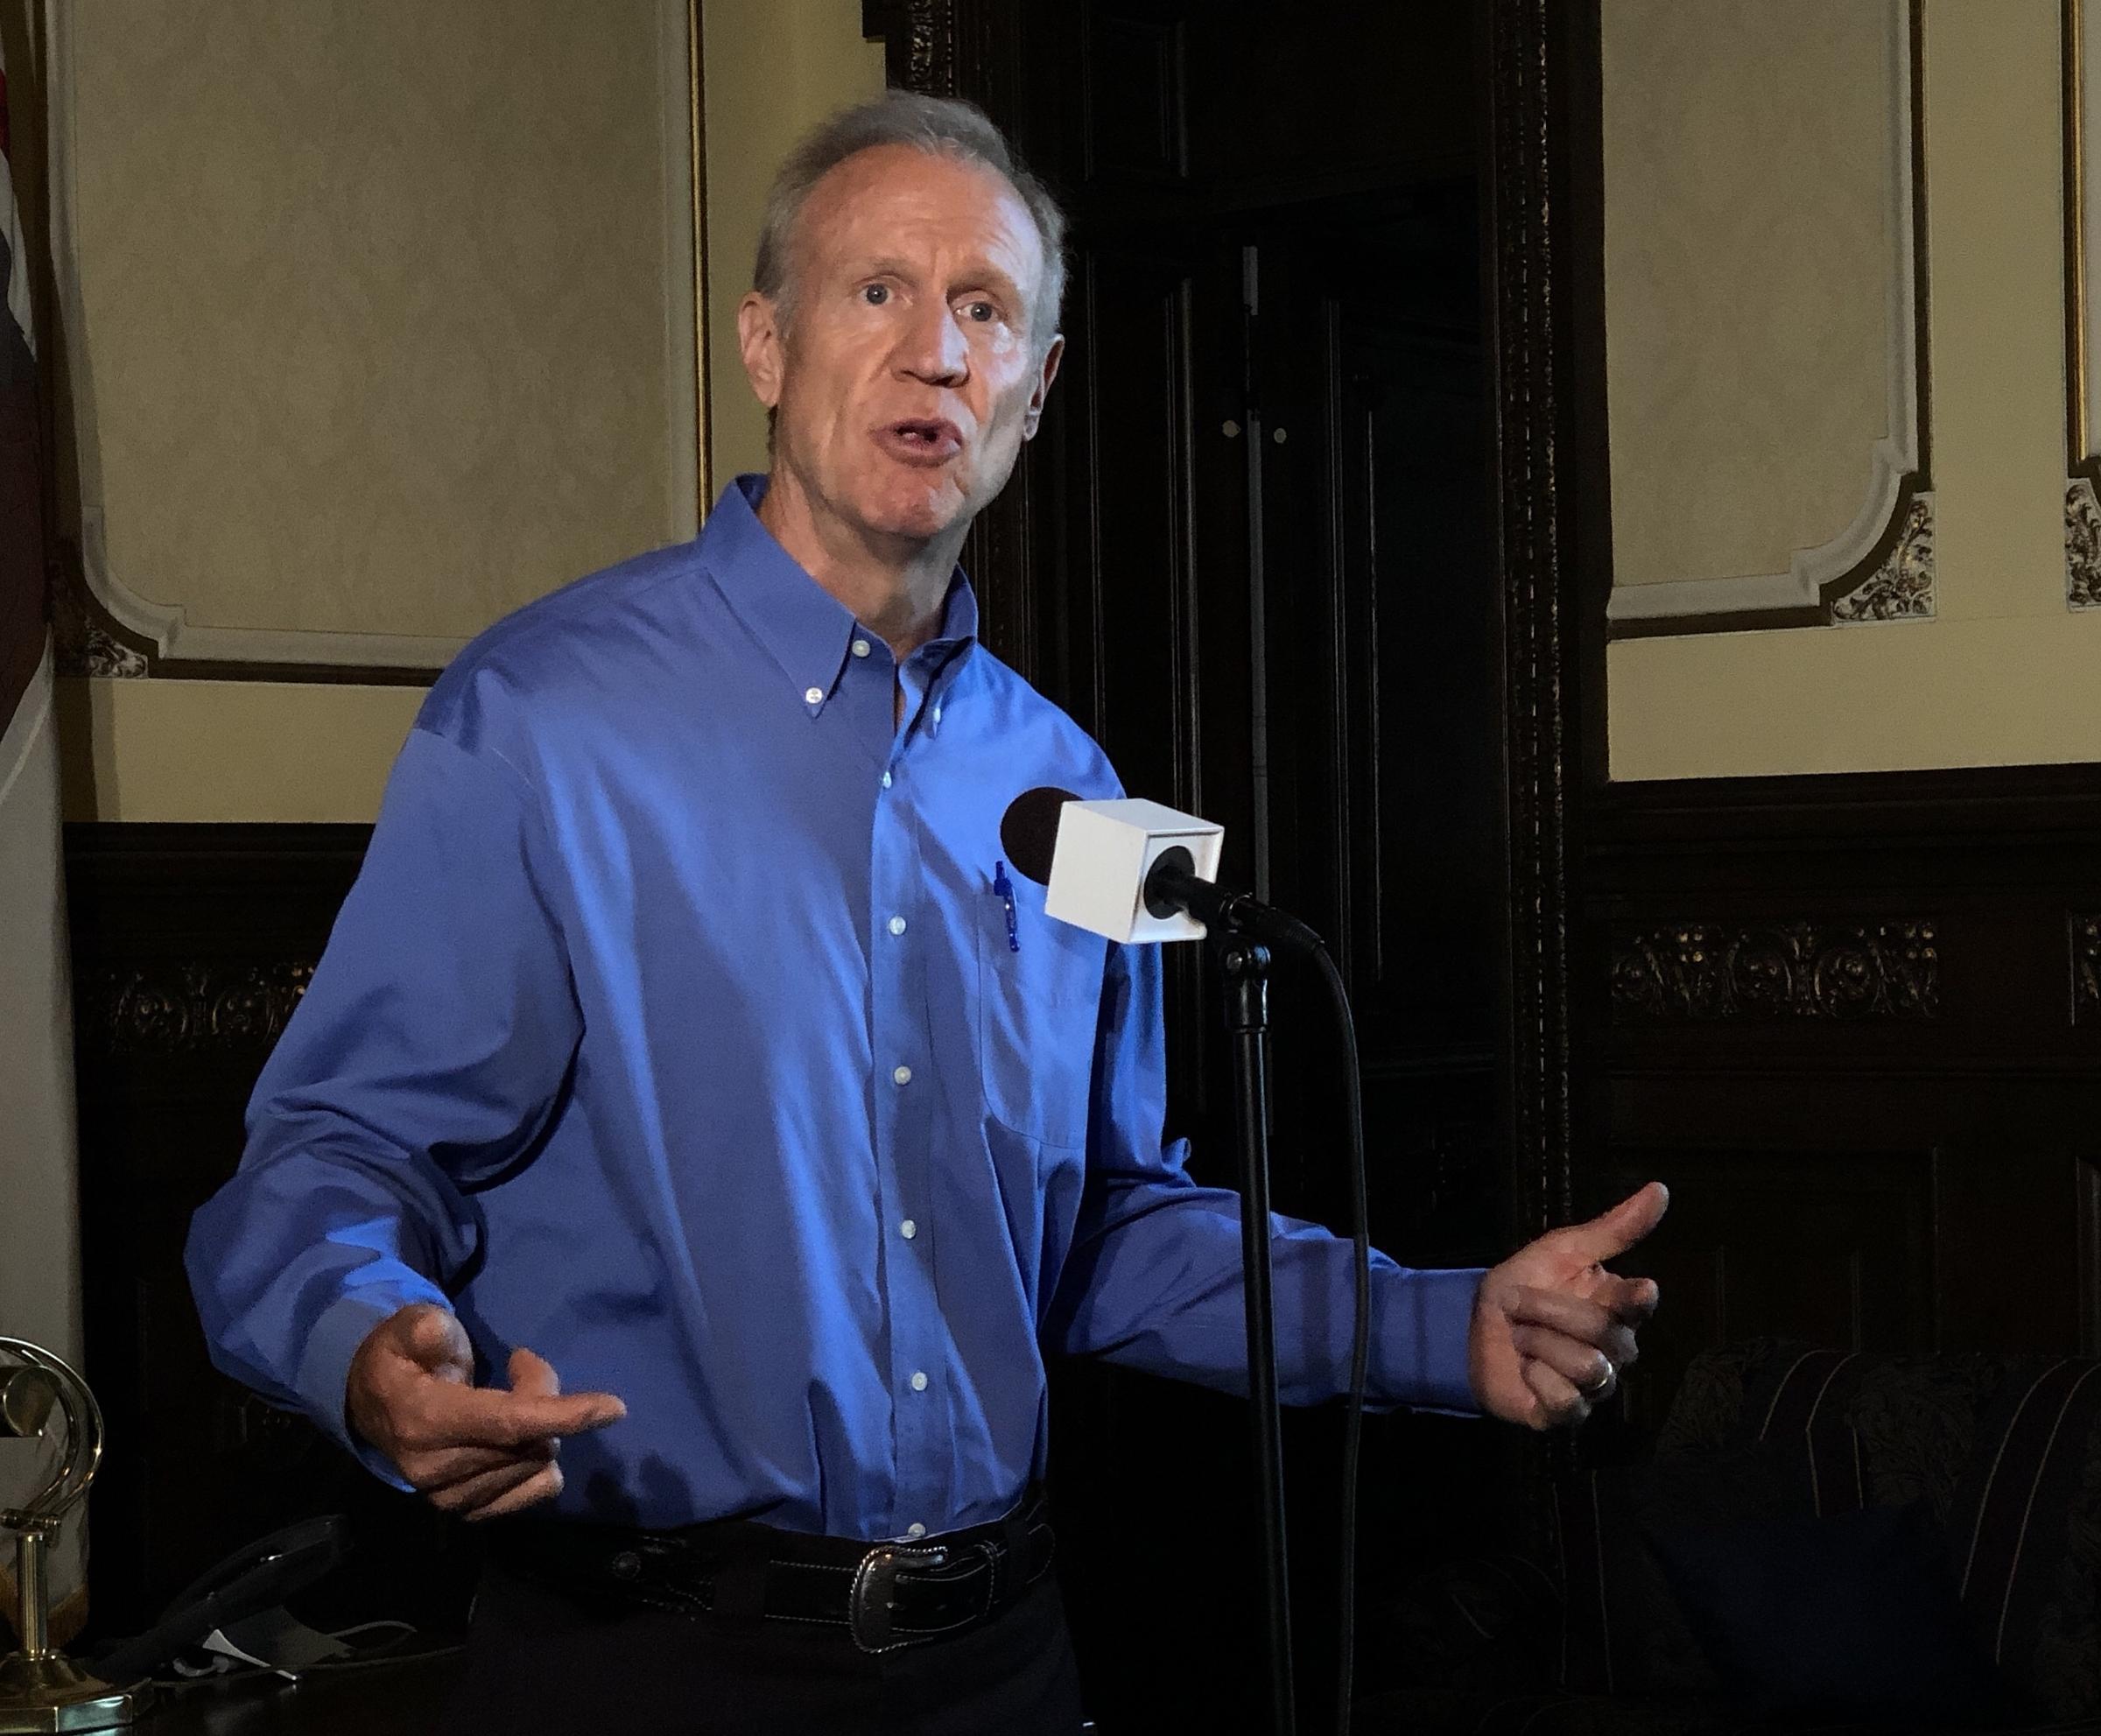 Gov. Bruce Rauner speaks with reporters Tuesday, July 17, 2018 in his ceremonial office at the Illinois Statehosue.